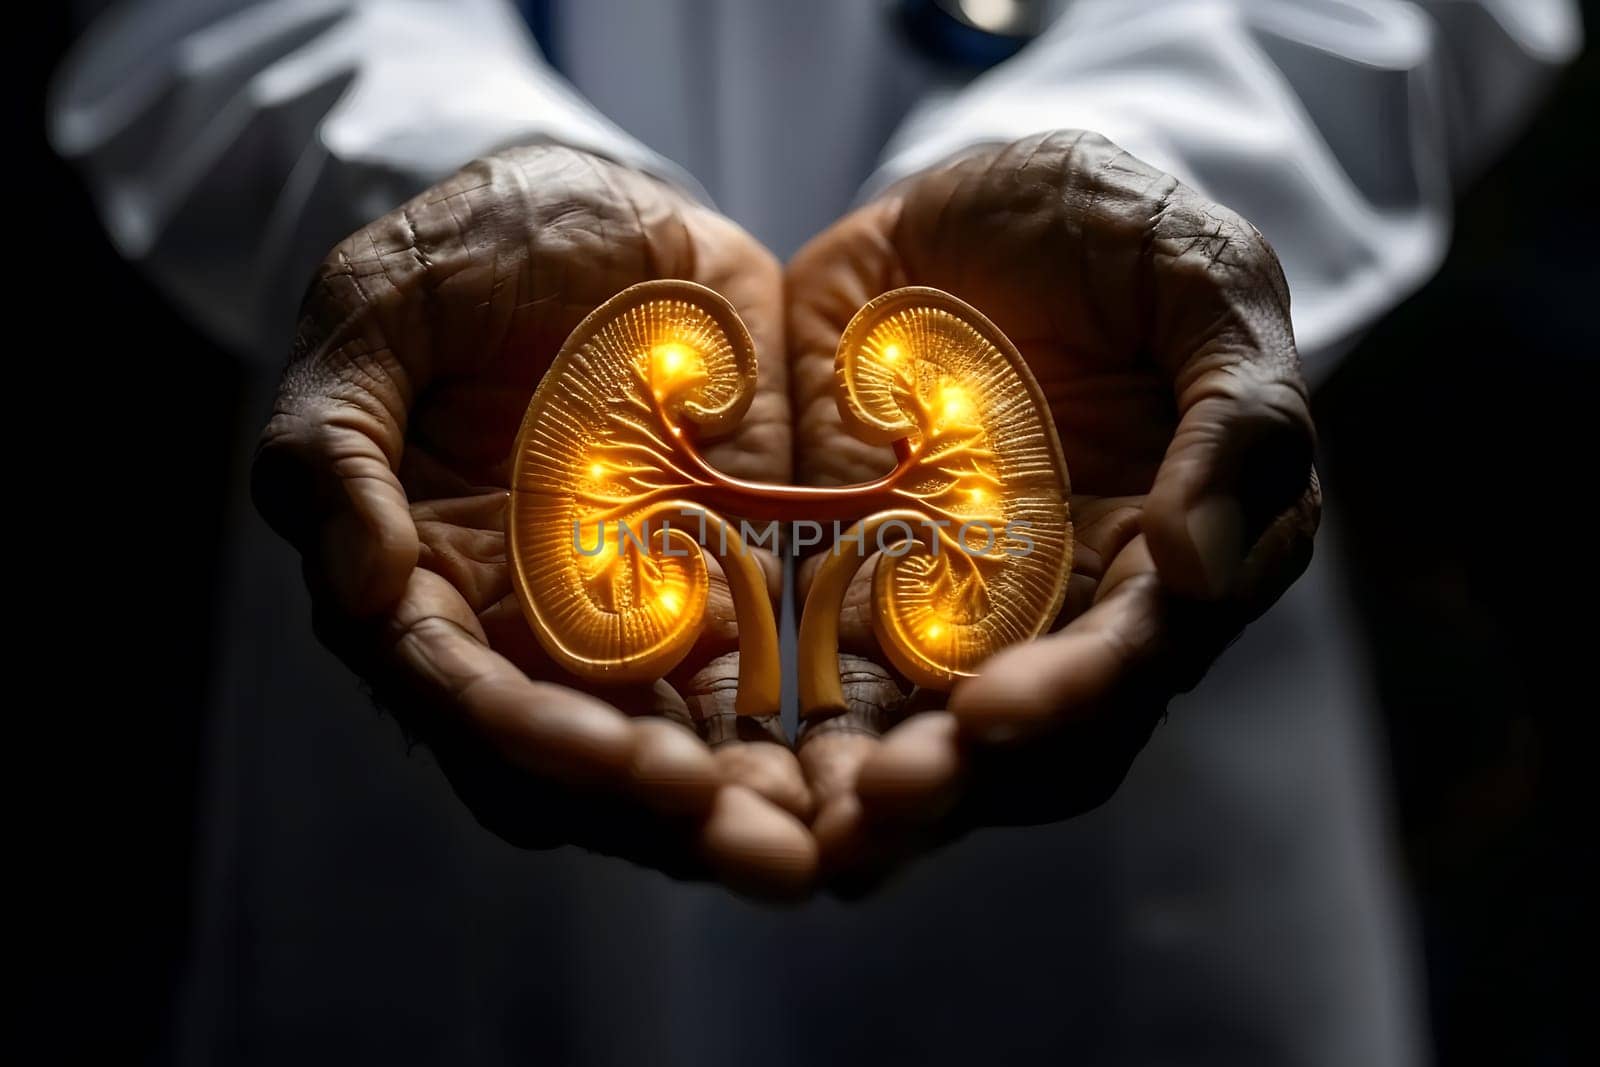 Close-up of doctor's hands cradling illuminated kidney model, symbolizing health care, medical education, and nephrology concept.